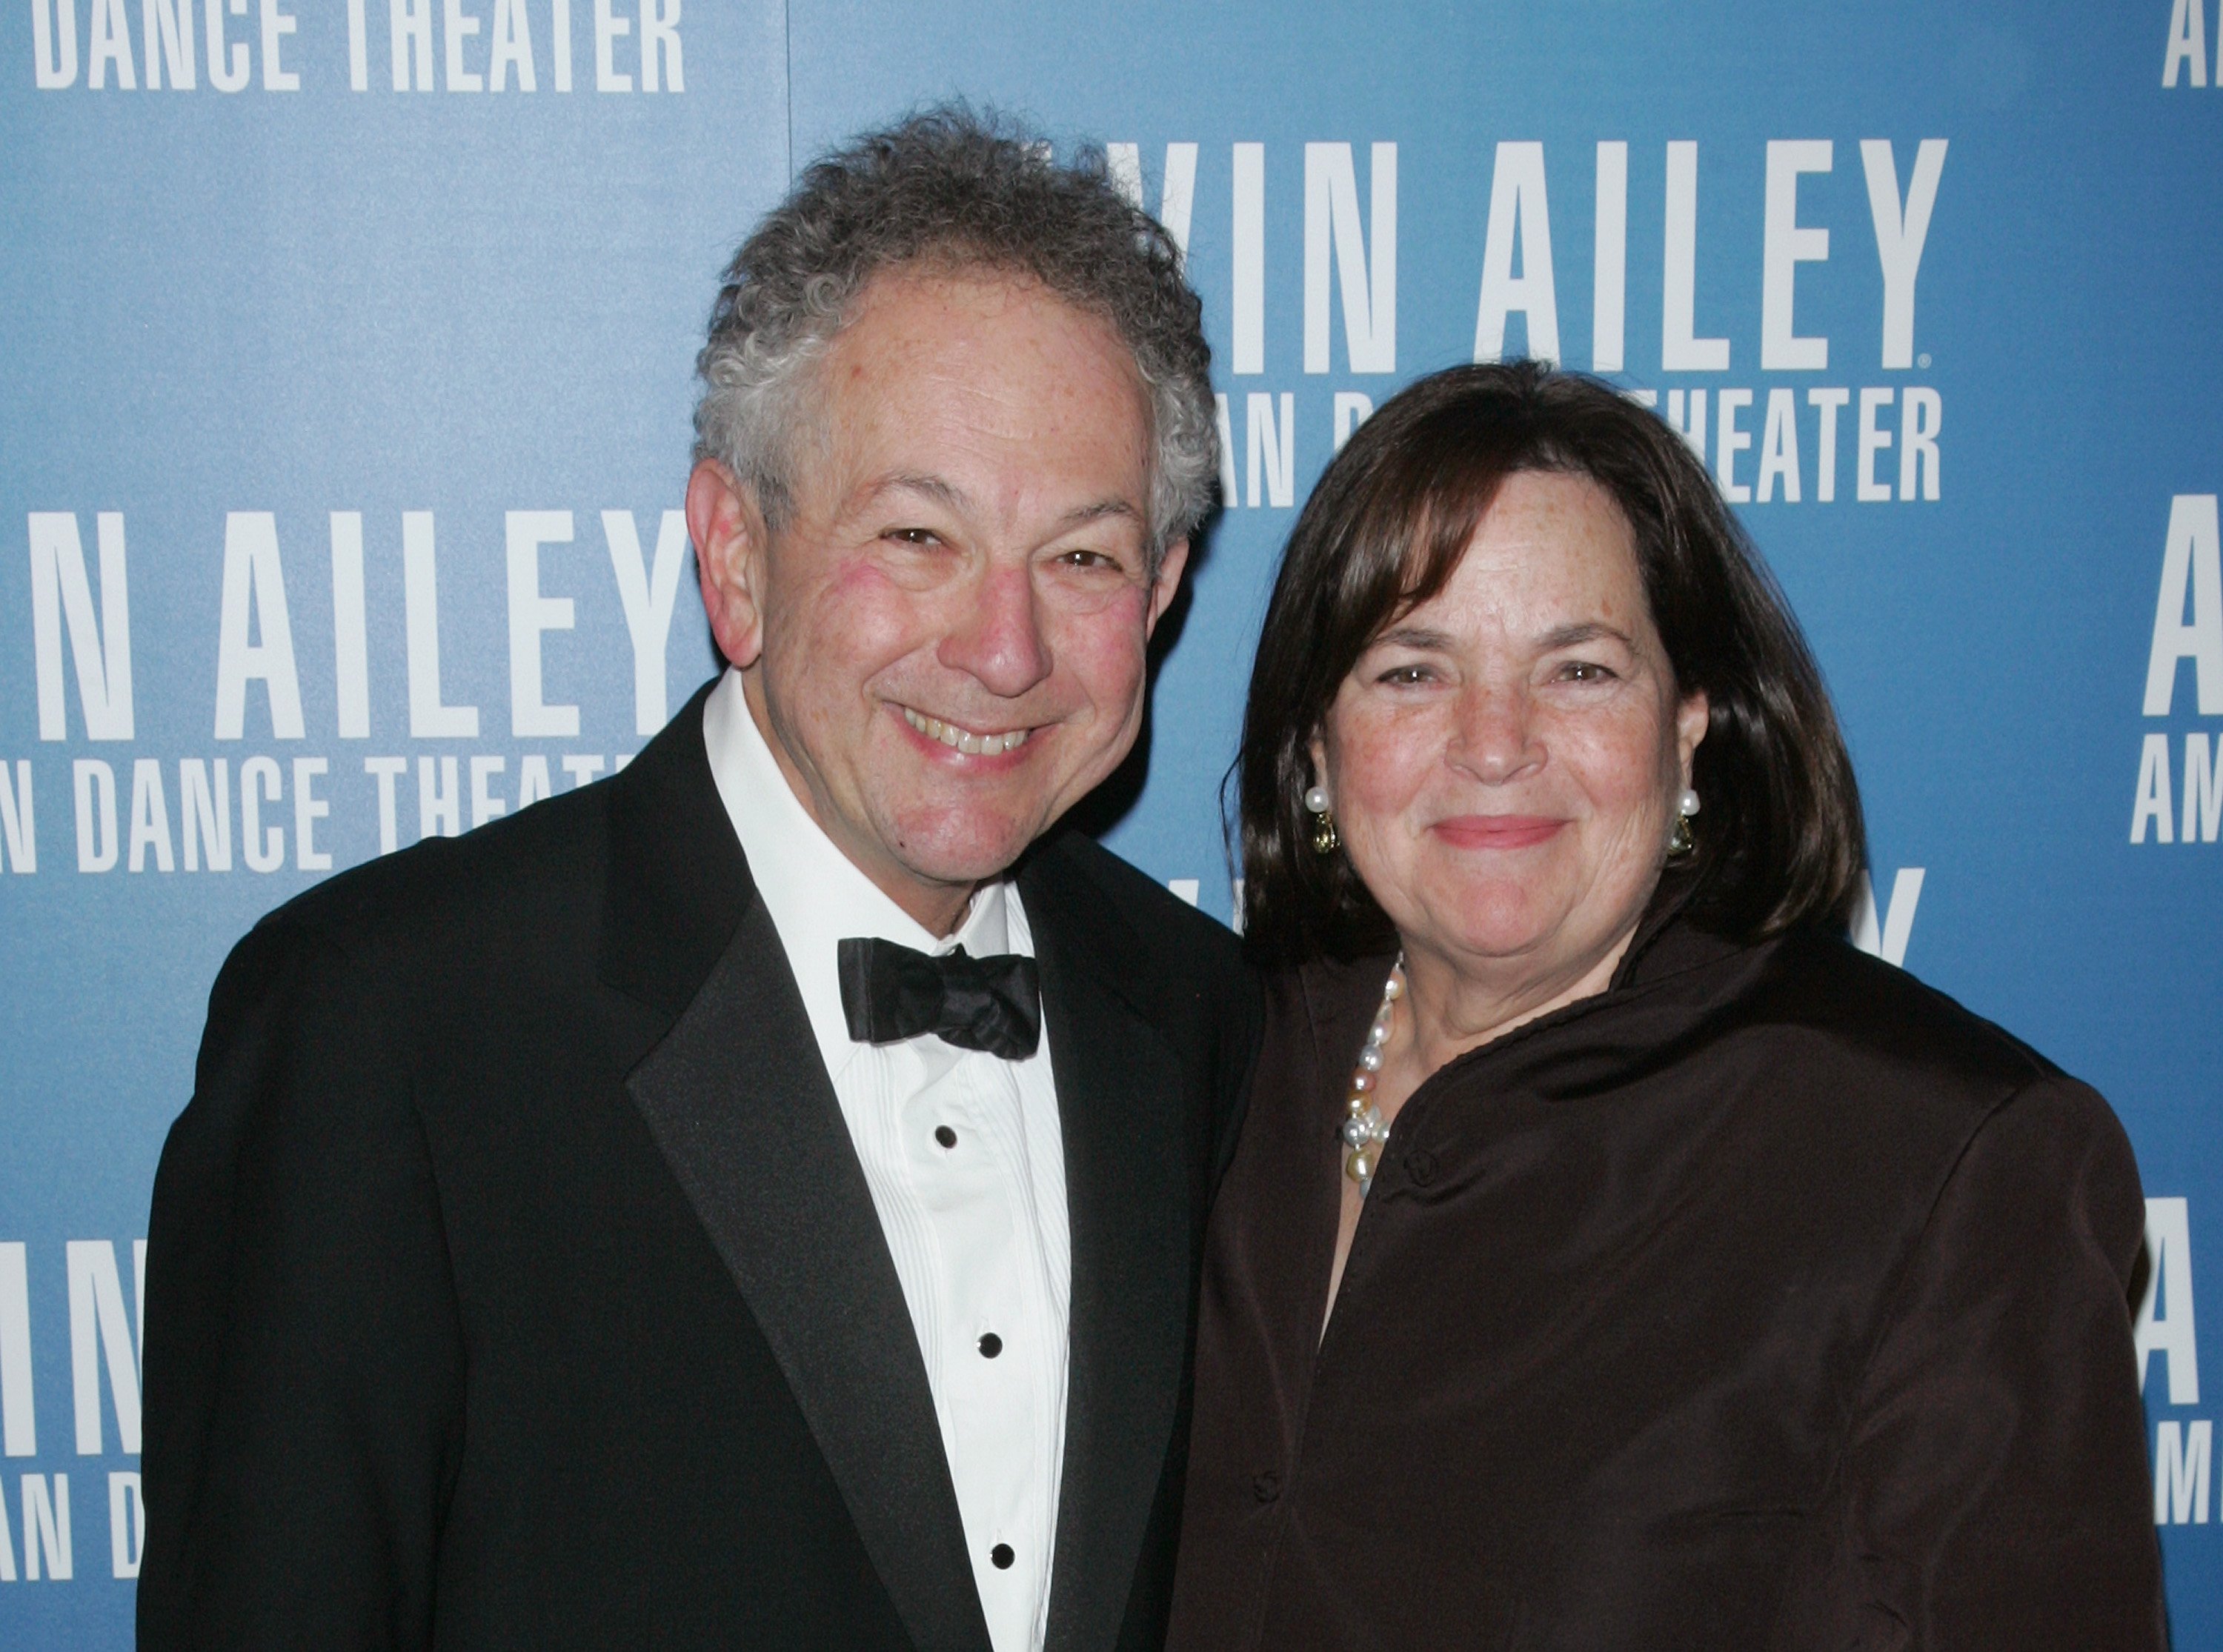 Jeffrey and Ina Garten attends the Alvin Ailey American Dance Theater Opening Night Gala on November 28, 2012, in New York City. | Source: Getty Images.